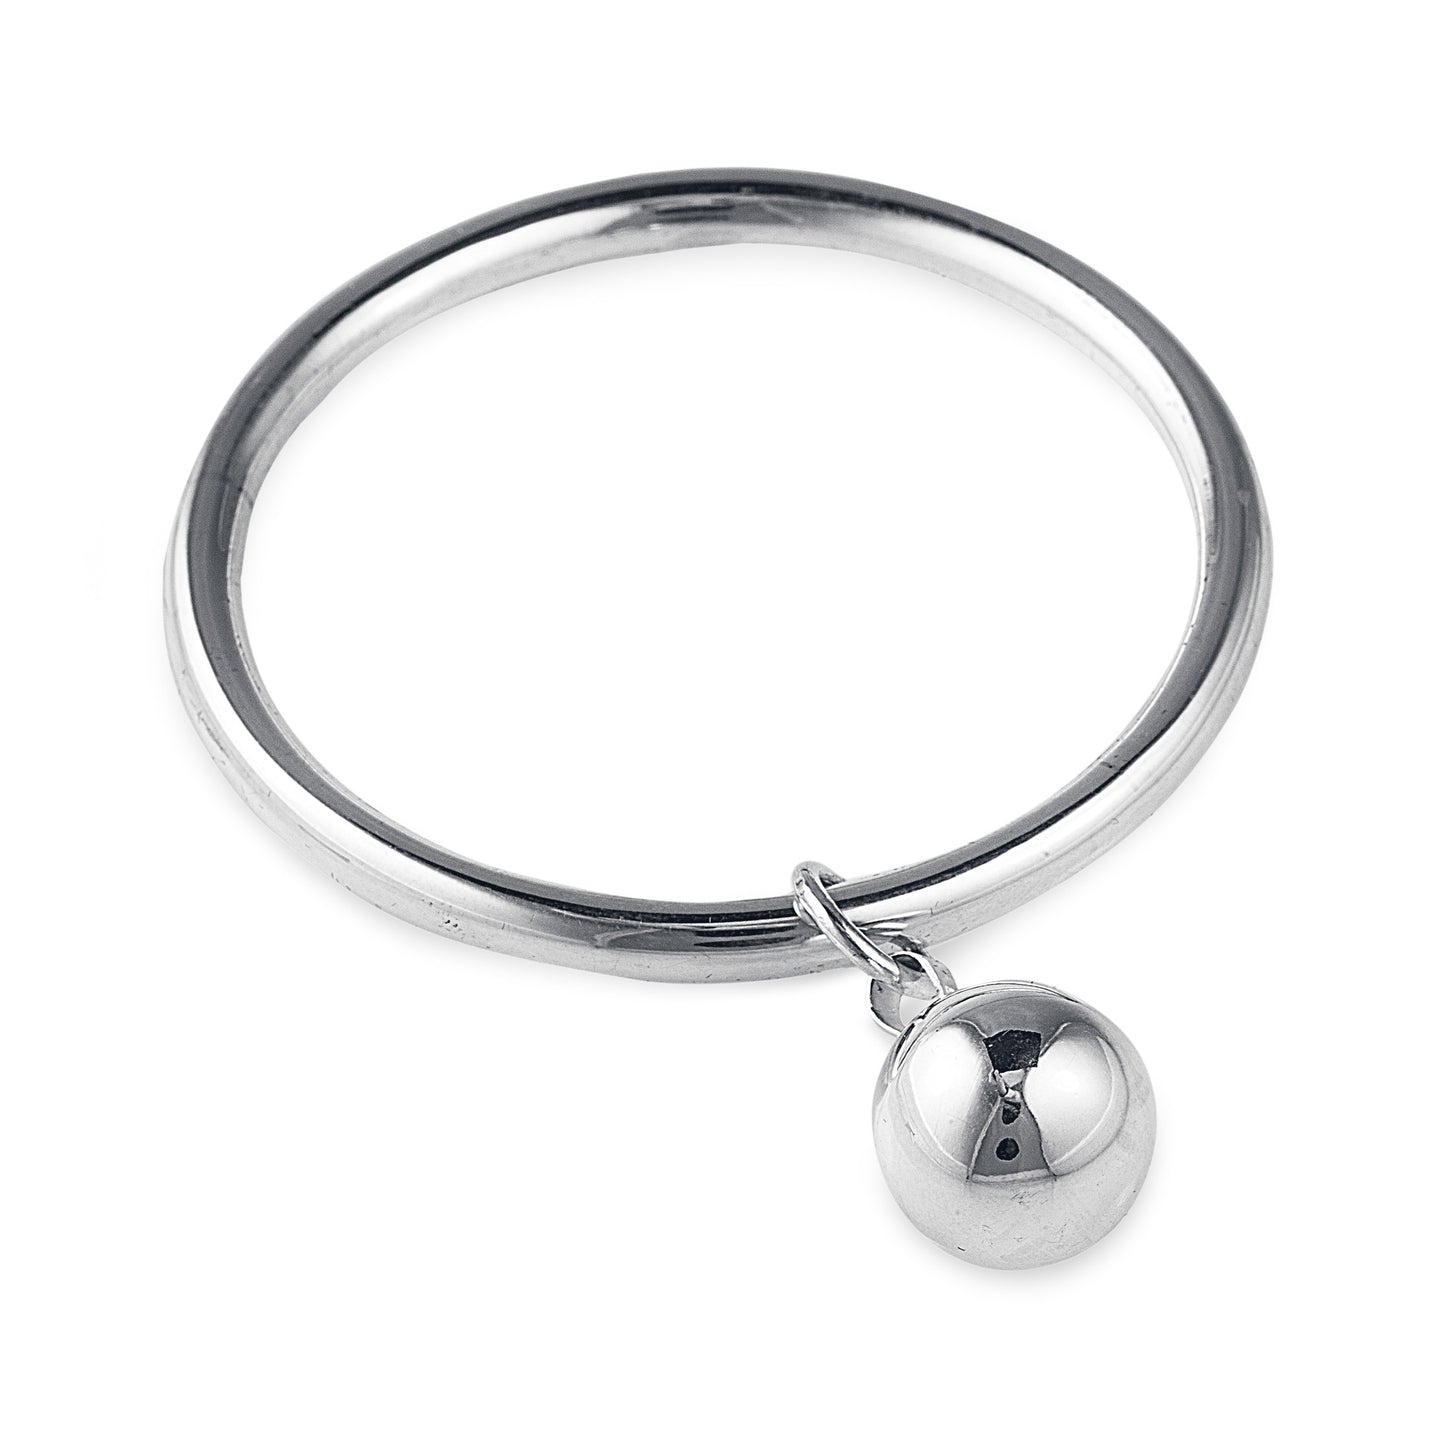 The Luna Bangle is a single classic bangle in 925 sterling silver featuring a large ball charm. The bangle is approximately 6.6cm in diameter. Luxury jewellery (bracelets, rings, necklaces and earrings) at affordable prices by Bellagio & Co. Worldwide Shipping plus FREE shipping for orders over $150 in Australia.